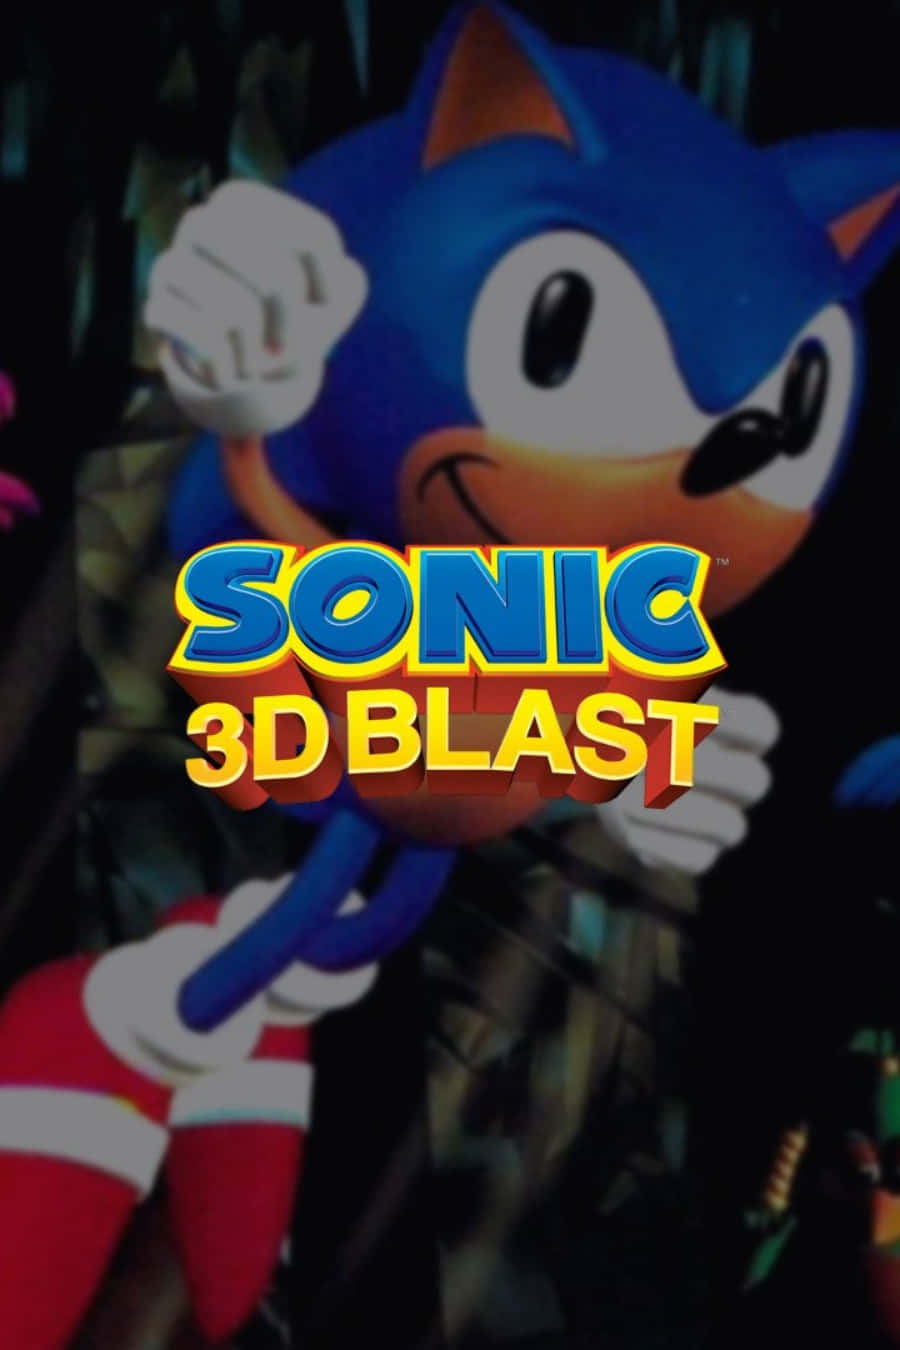 Sonic the Hedgehog charging through a colorful and energetic 3D world in Sonic 3D Blast Wallpaper